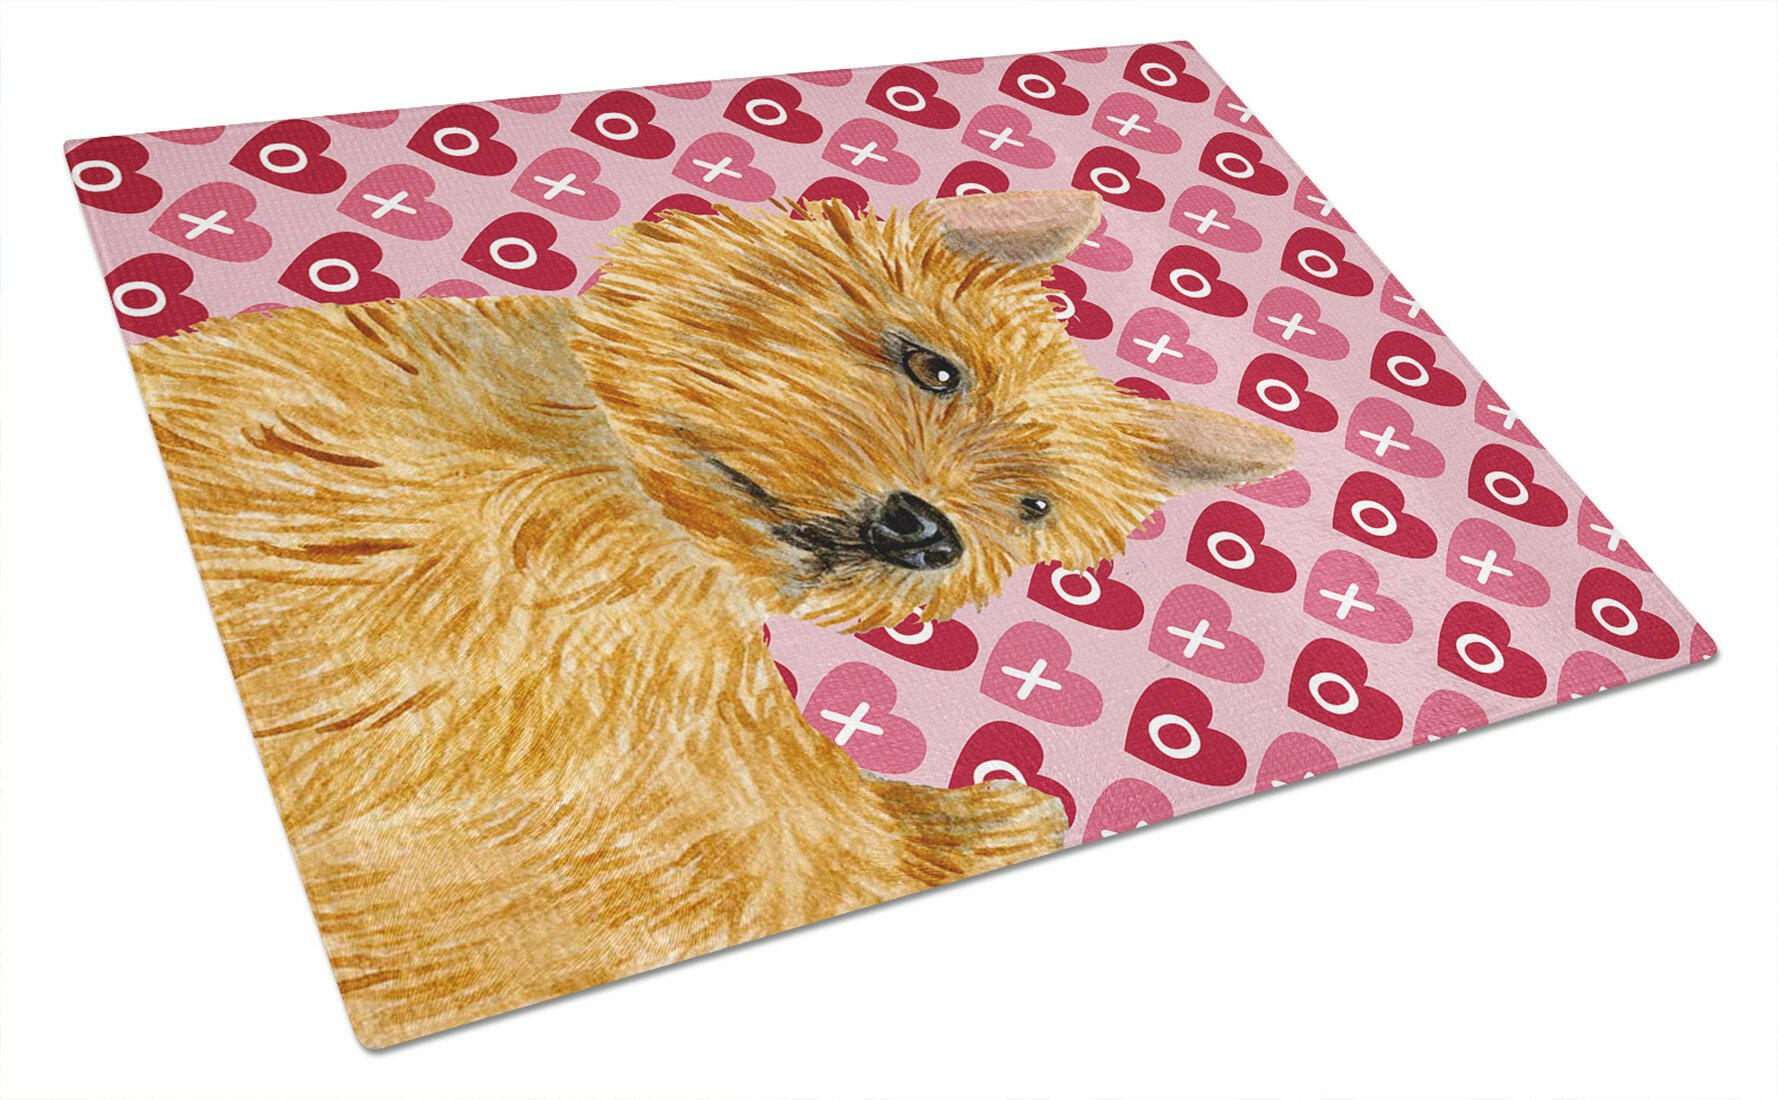 Norwich Terrier Hearts Love and Valentine's Day Glass Cutting Board Large by Caroline's Treasures